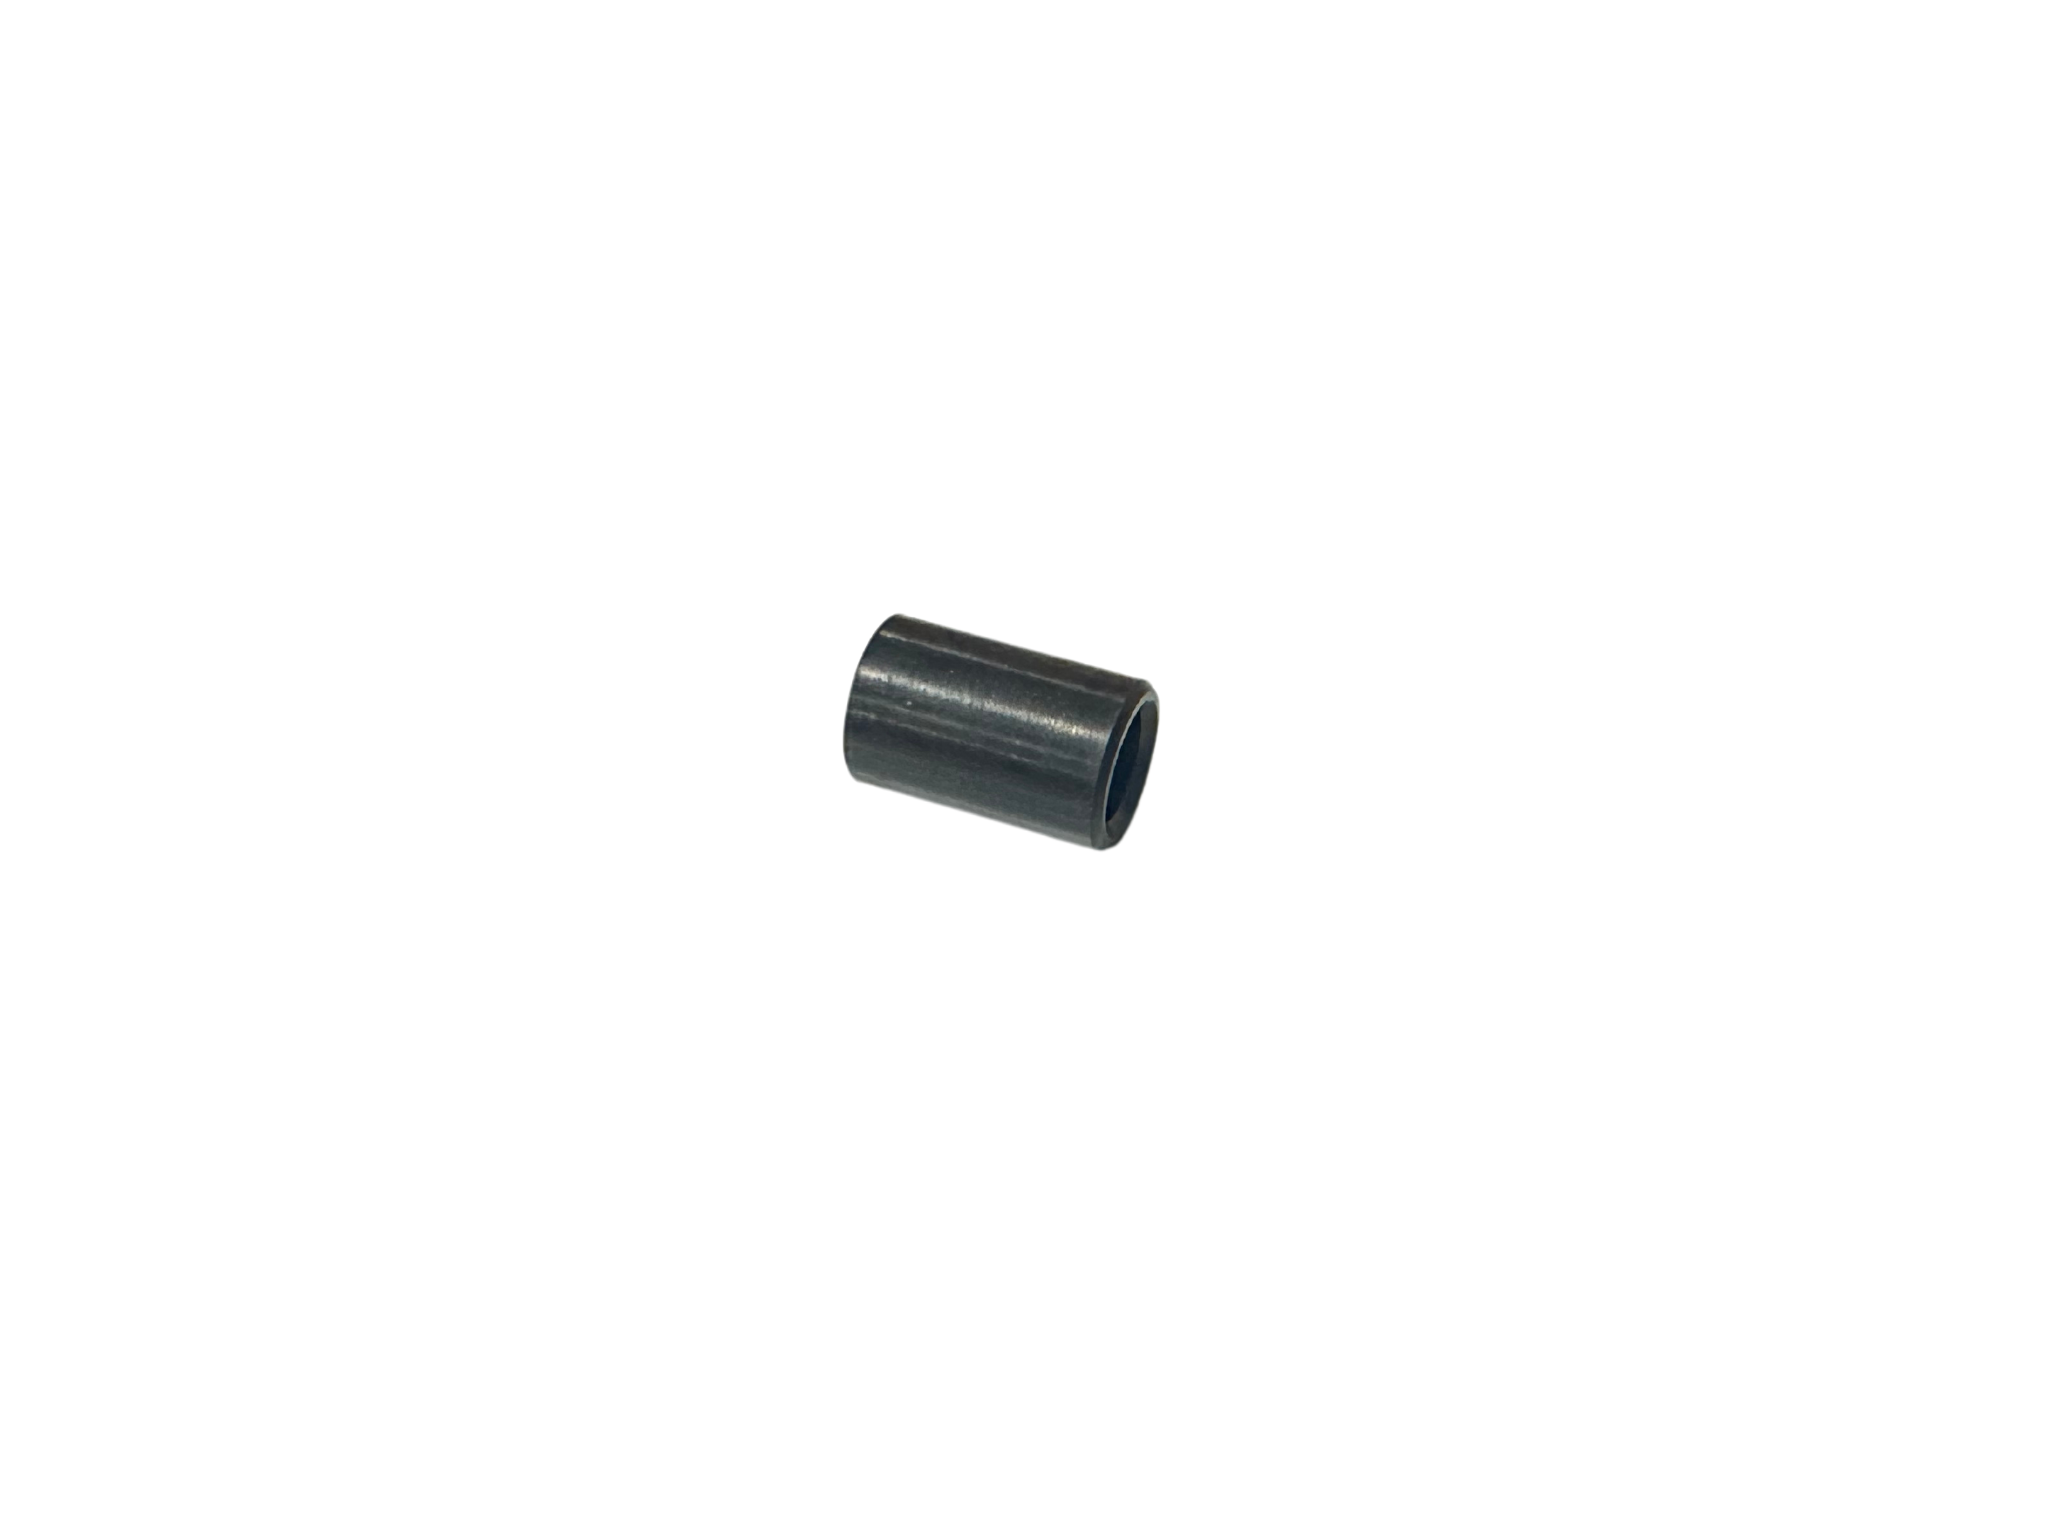 Hop Up Rubber (Part No. 3003-1508) for KWA Lithgow Arms F90 GBB